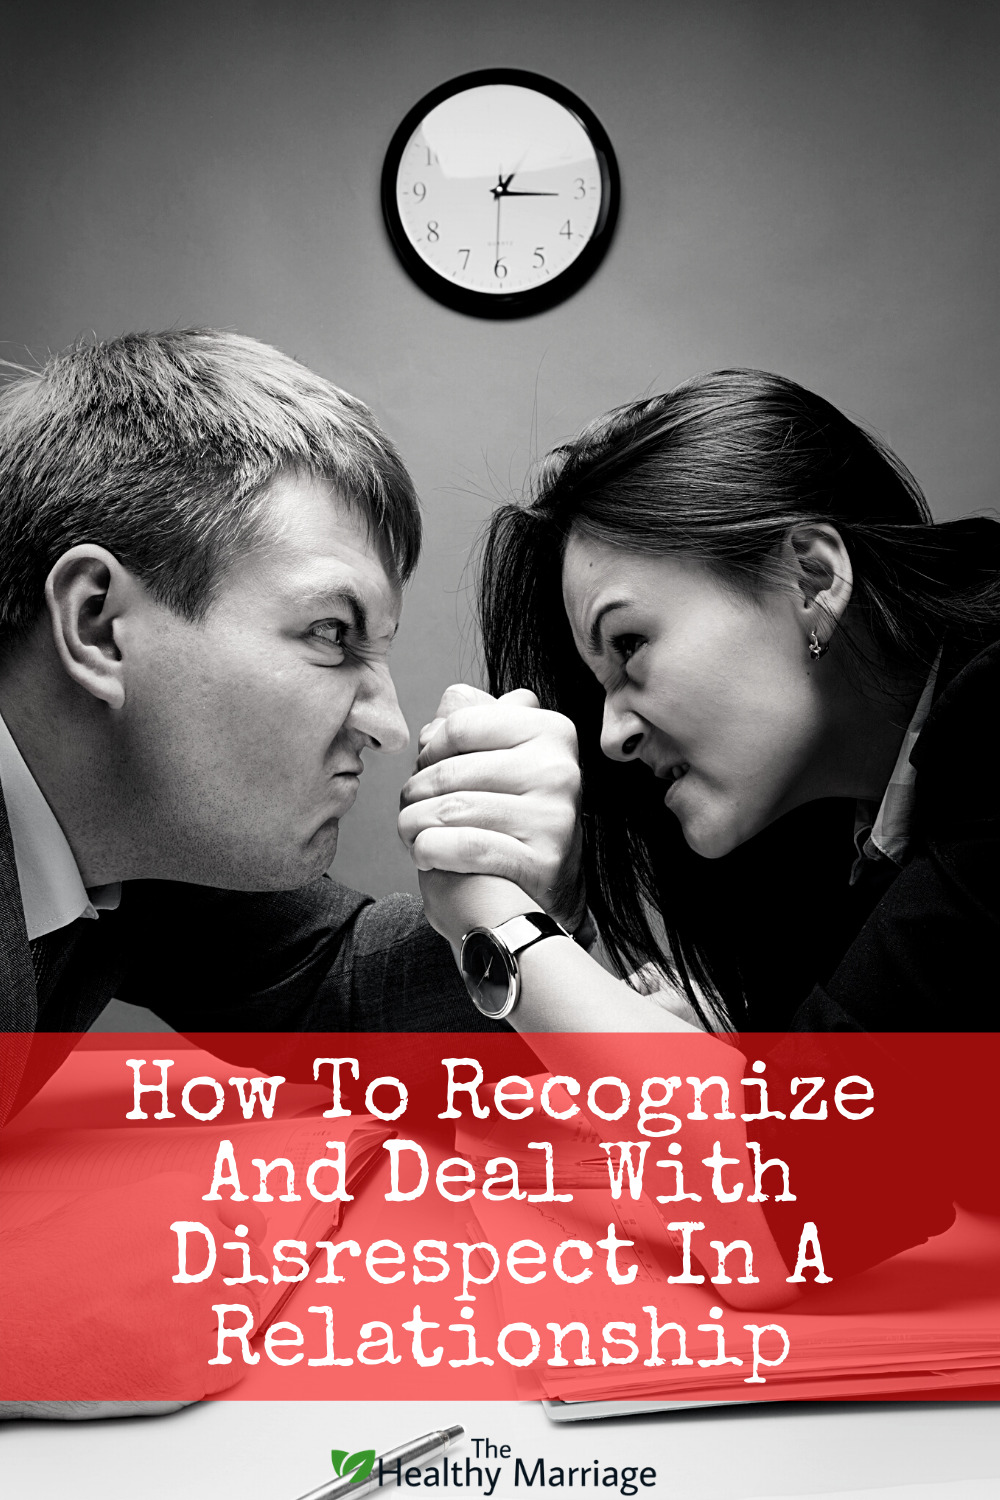 In relationship a with dealing disrespect Steps You